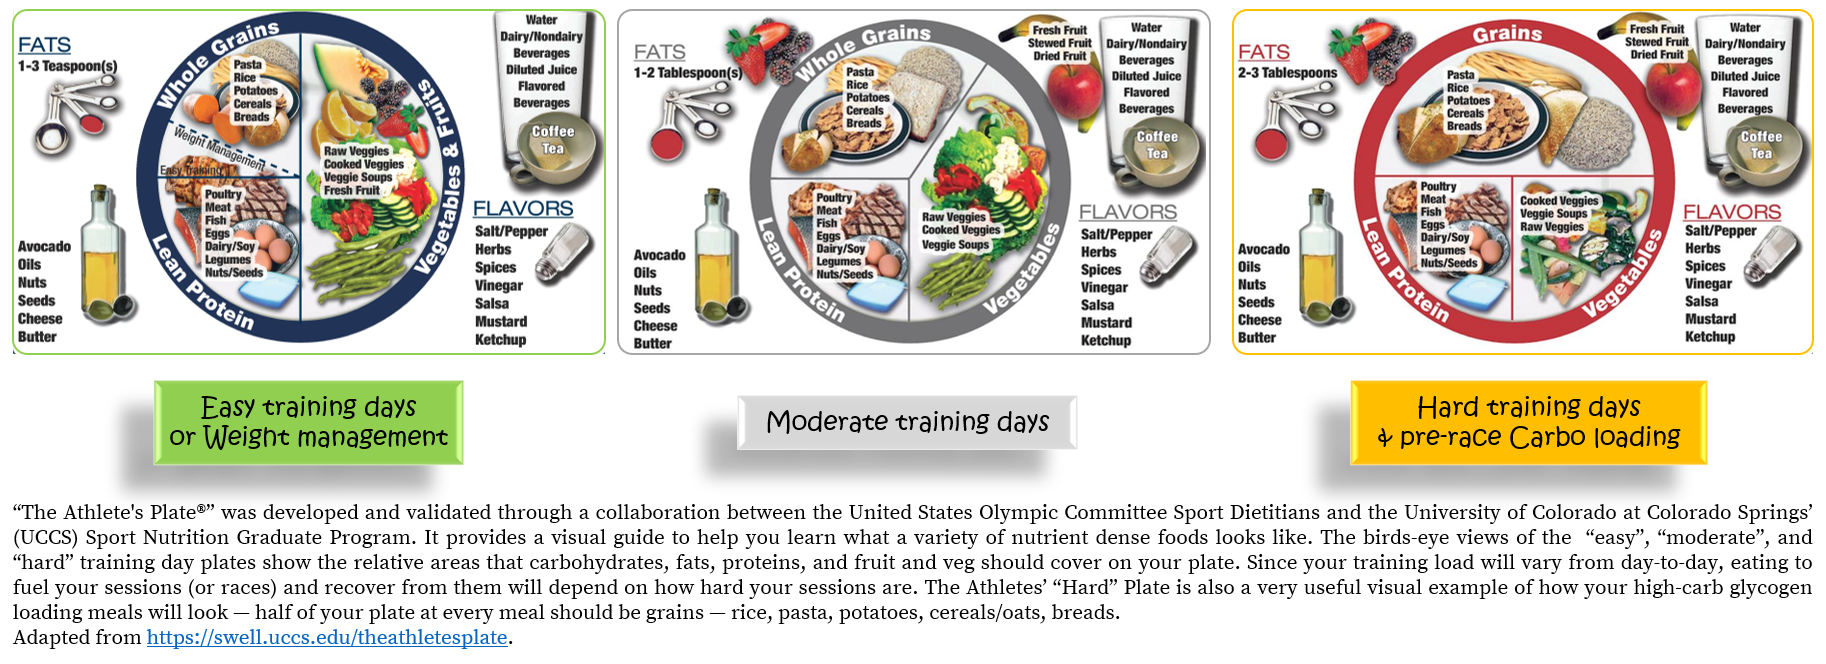 The athletes’ plates for muscle glycogen supercompensation for runners and OCR athletes from Thomas Solomon at Veohtu.